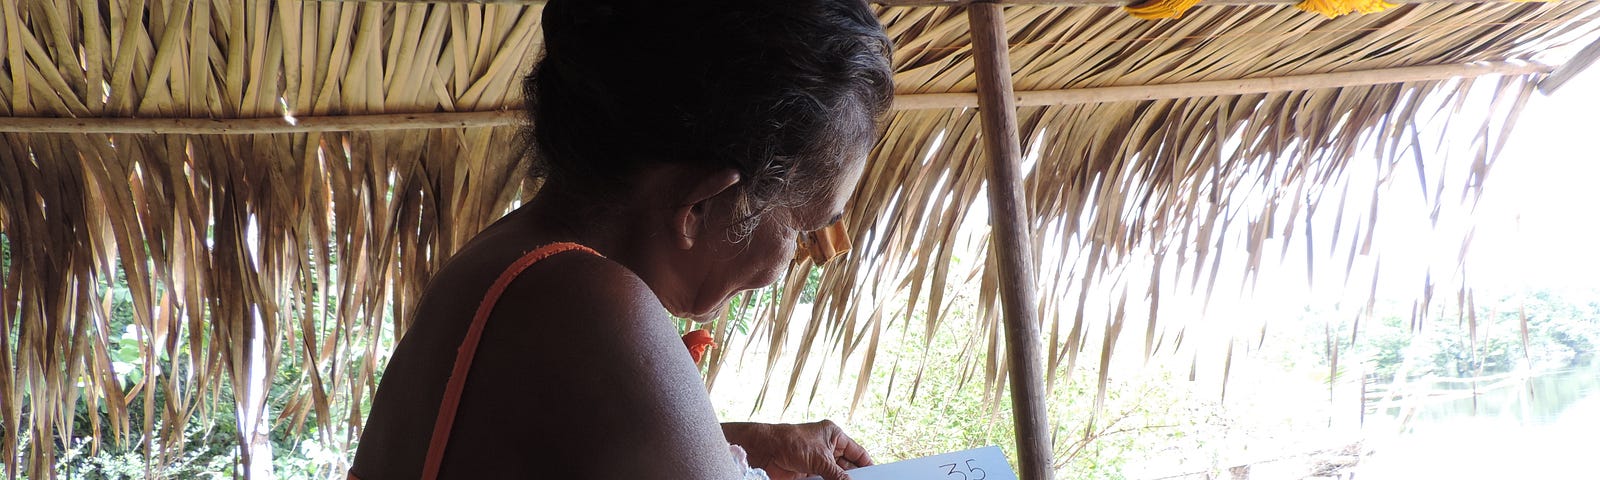 A woman sitting under a thatched roof viewing a photo of a fish